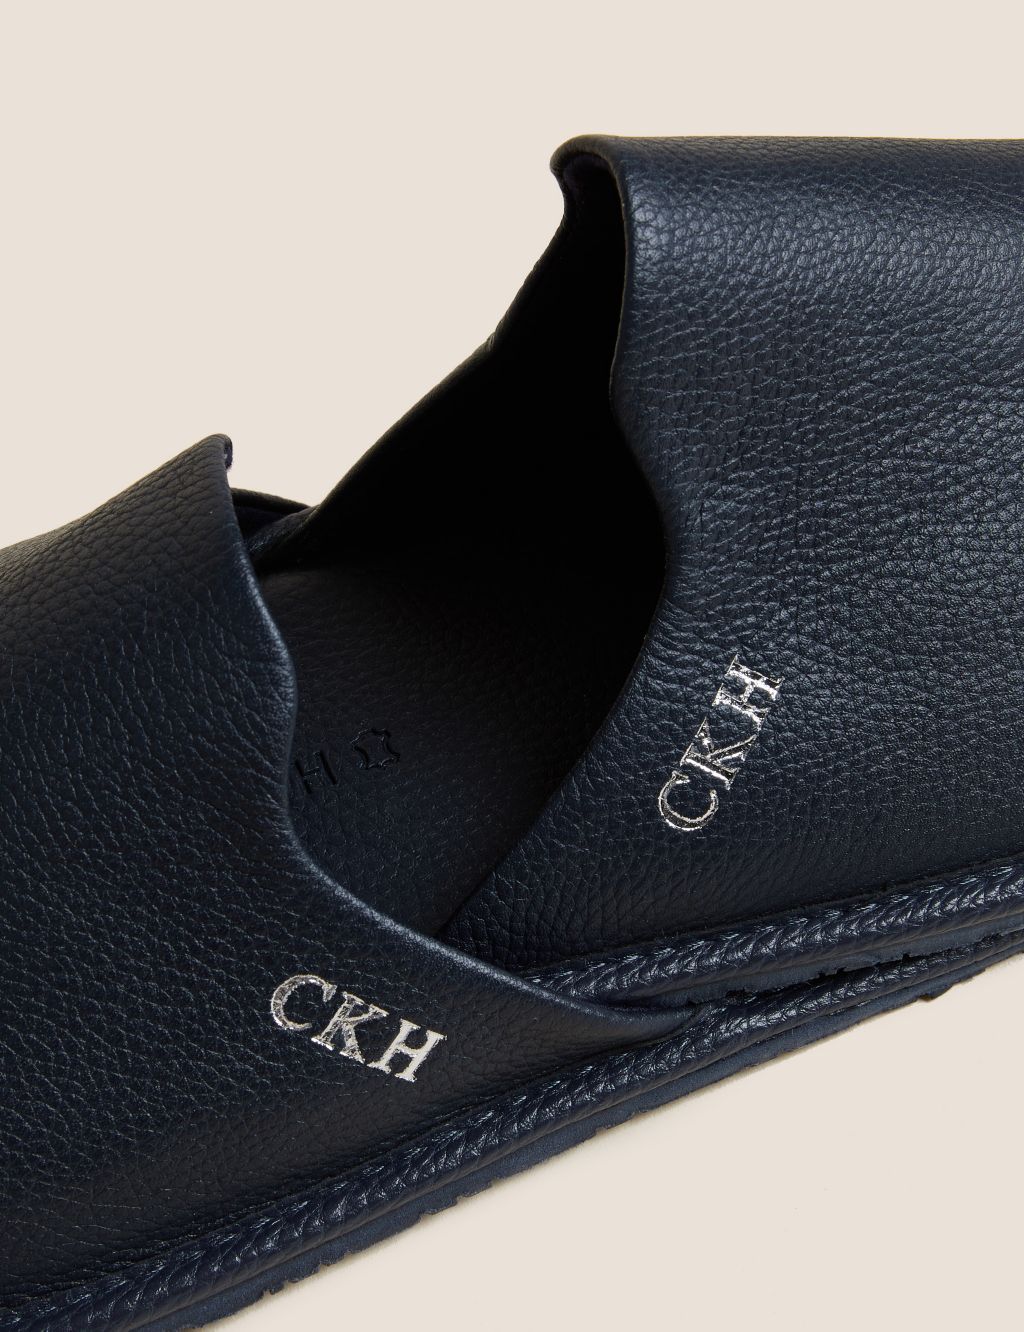 Personalised Men's Leather Mule Slippers image 2